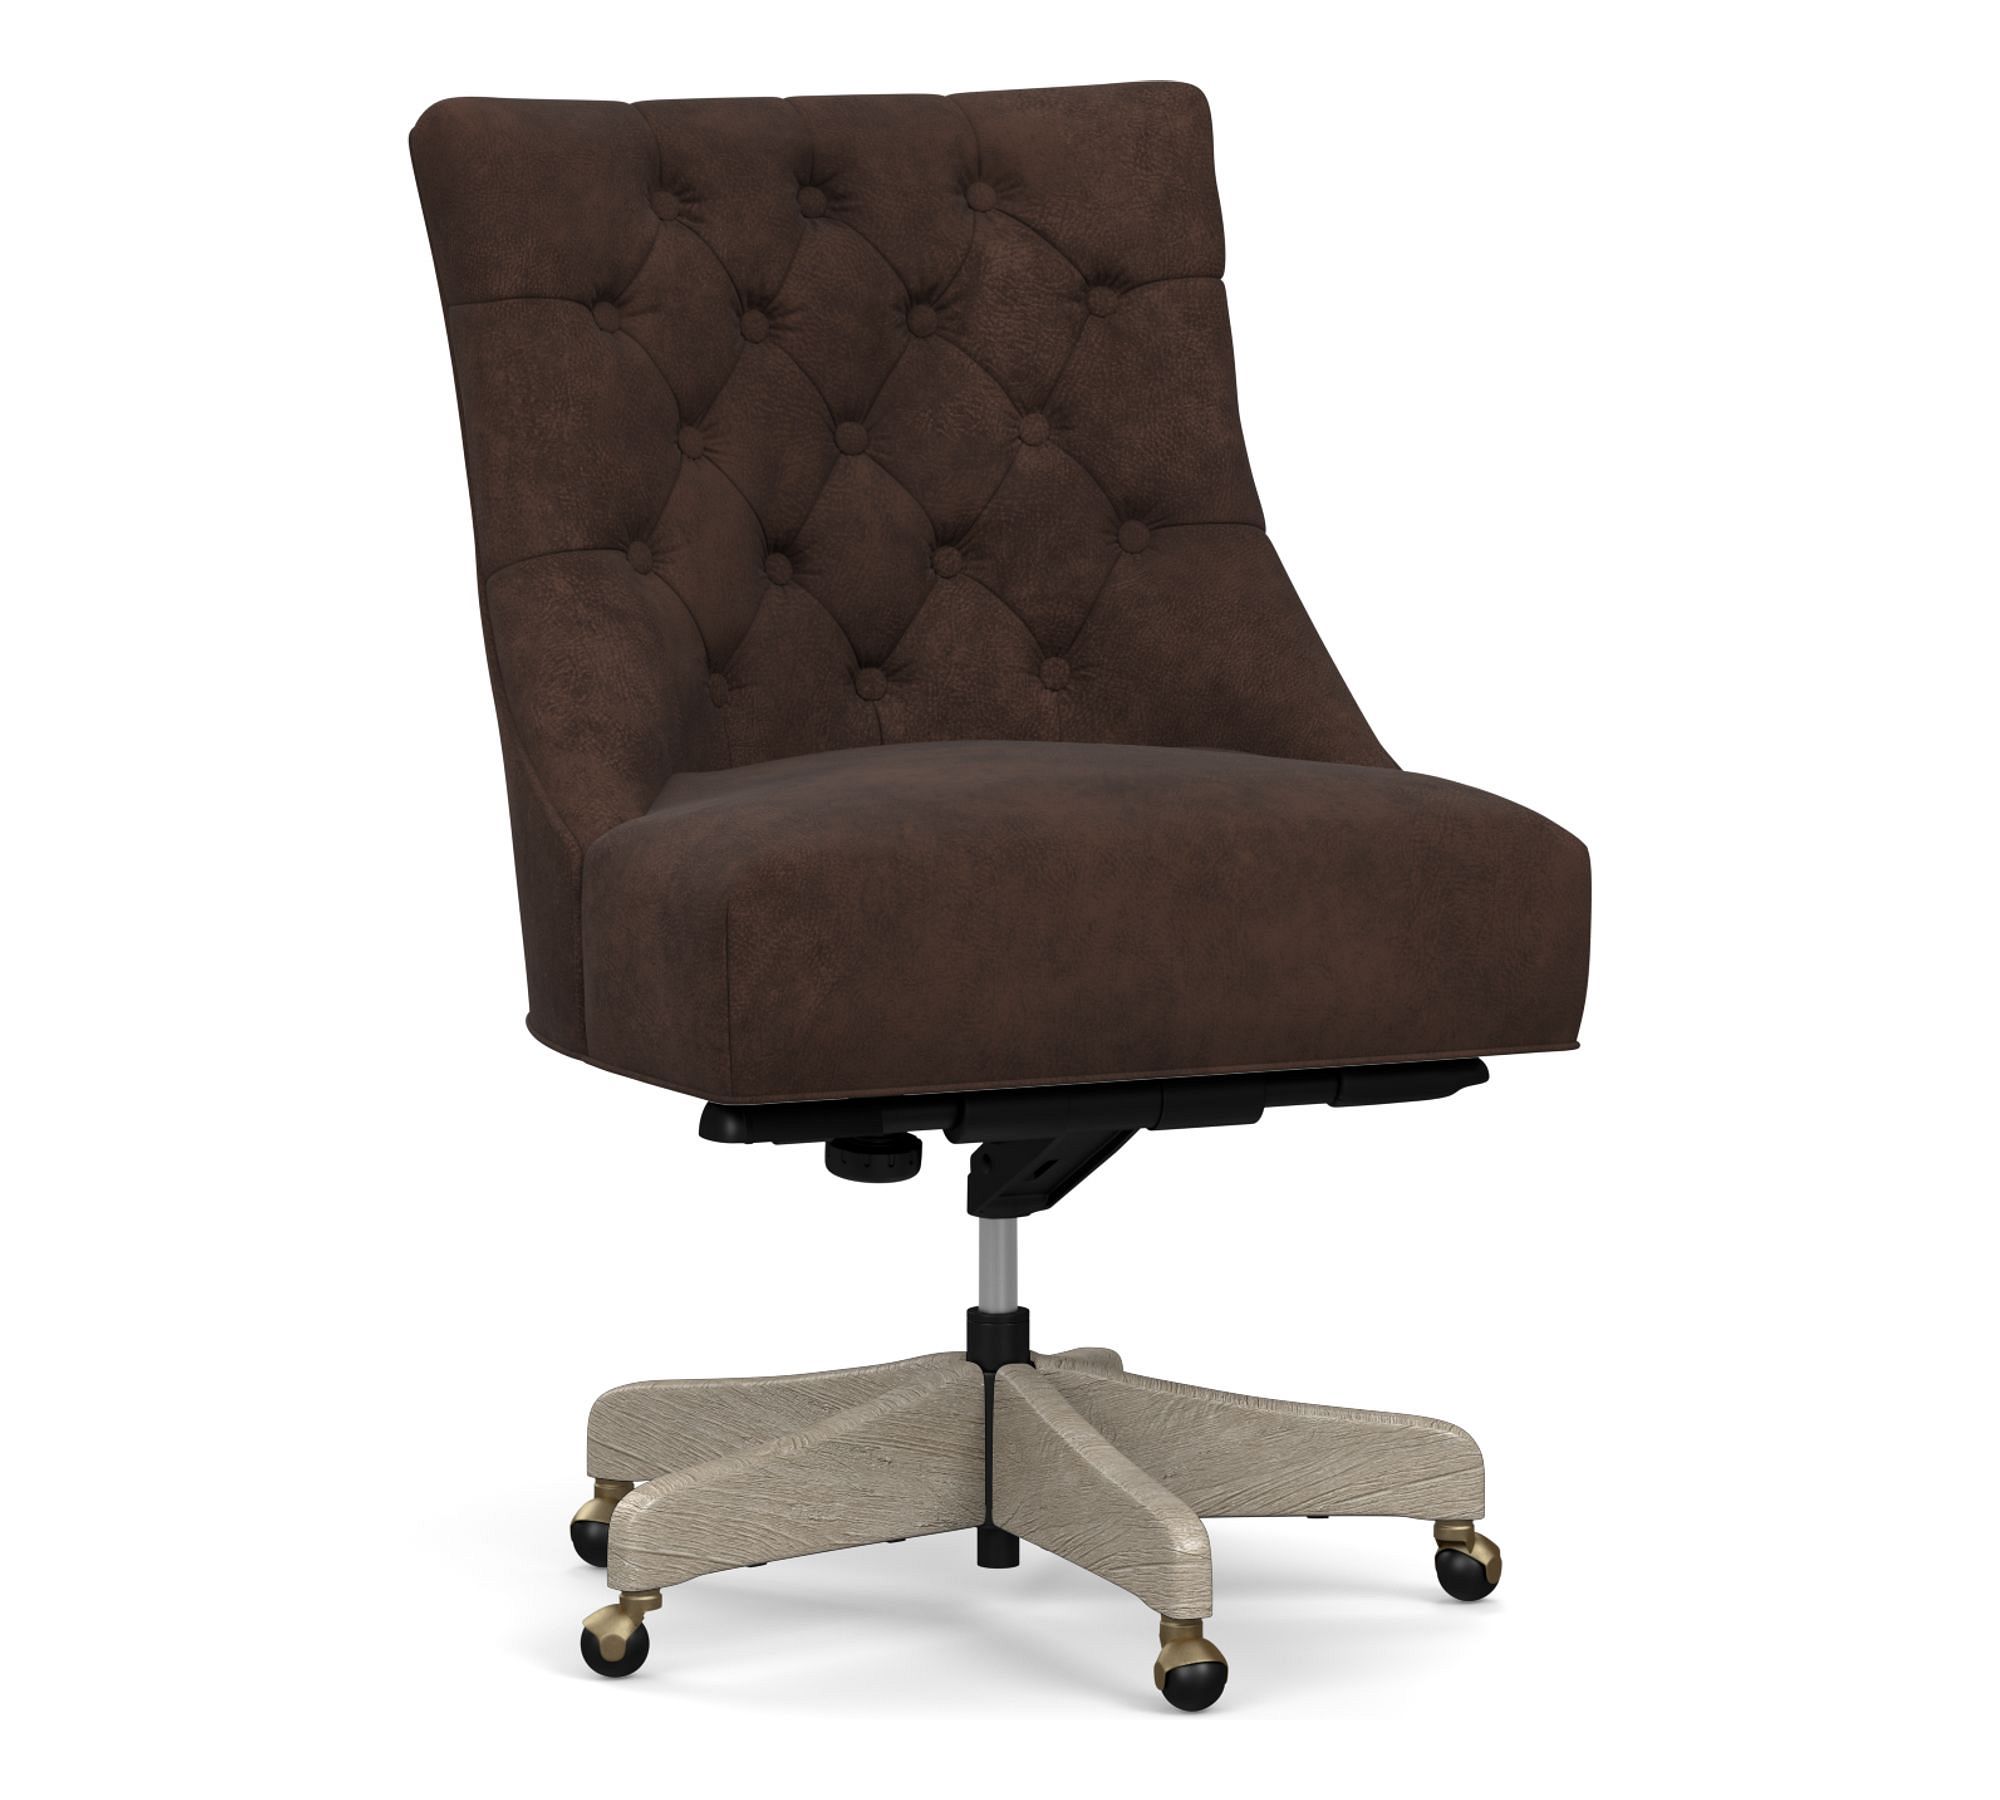 Hayes Tufted Leather Swivel Desk Chair